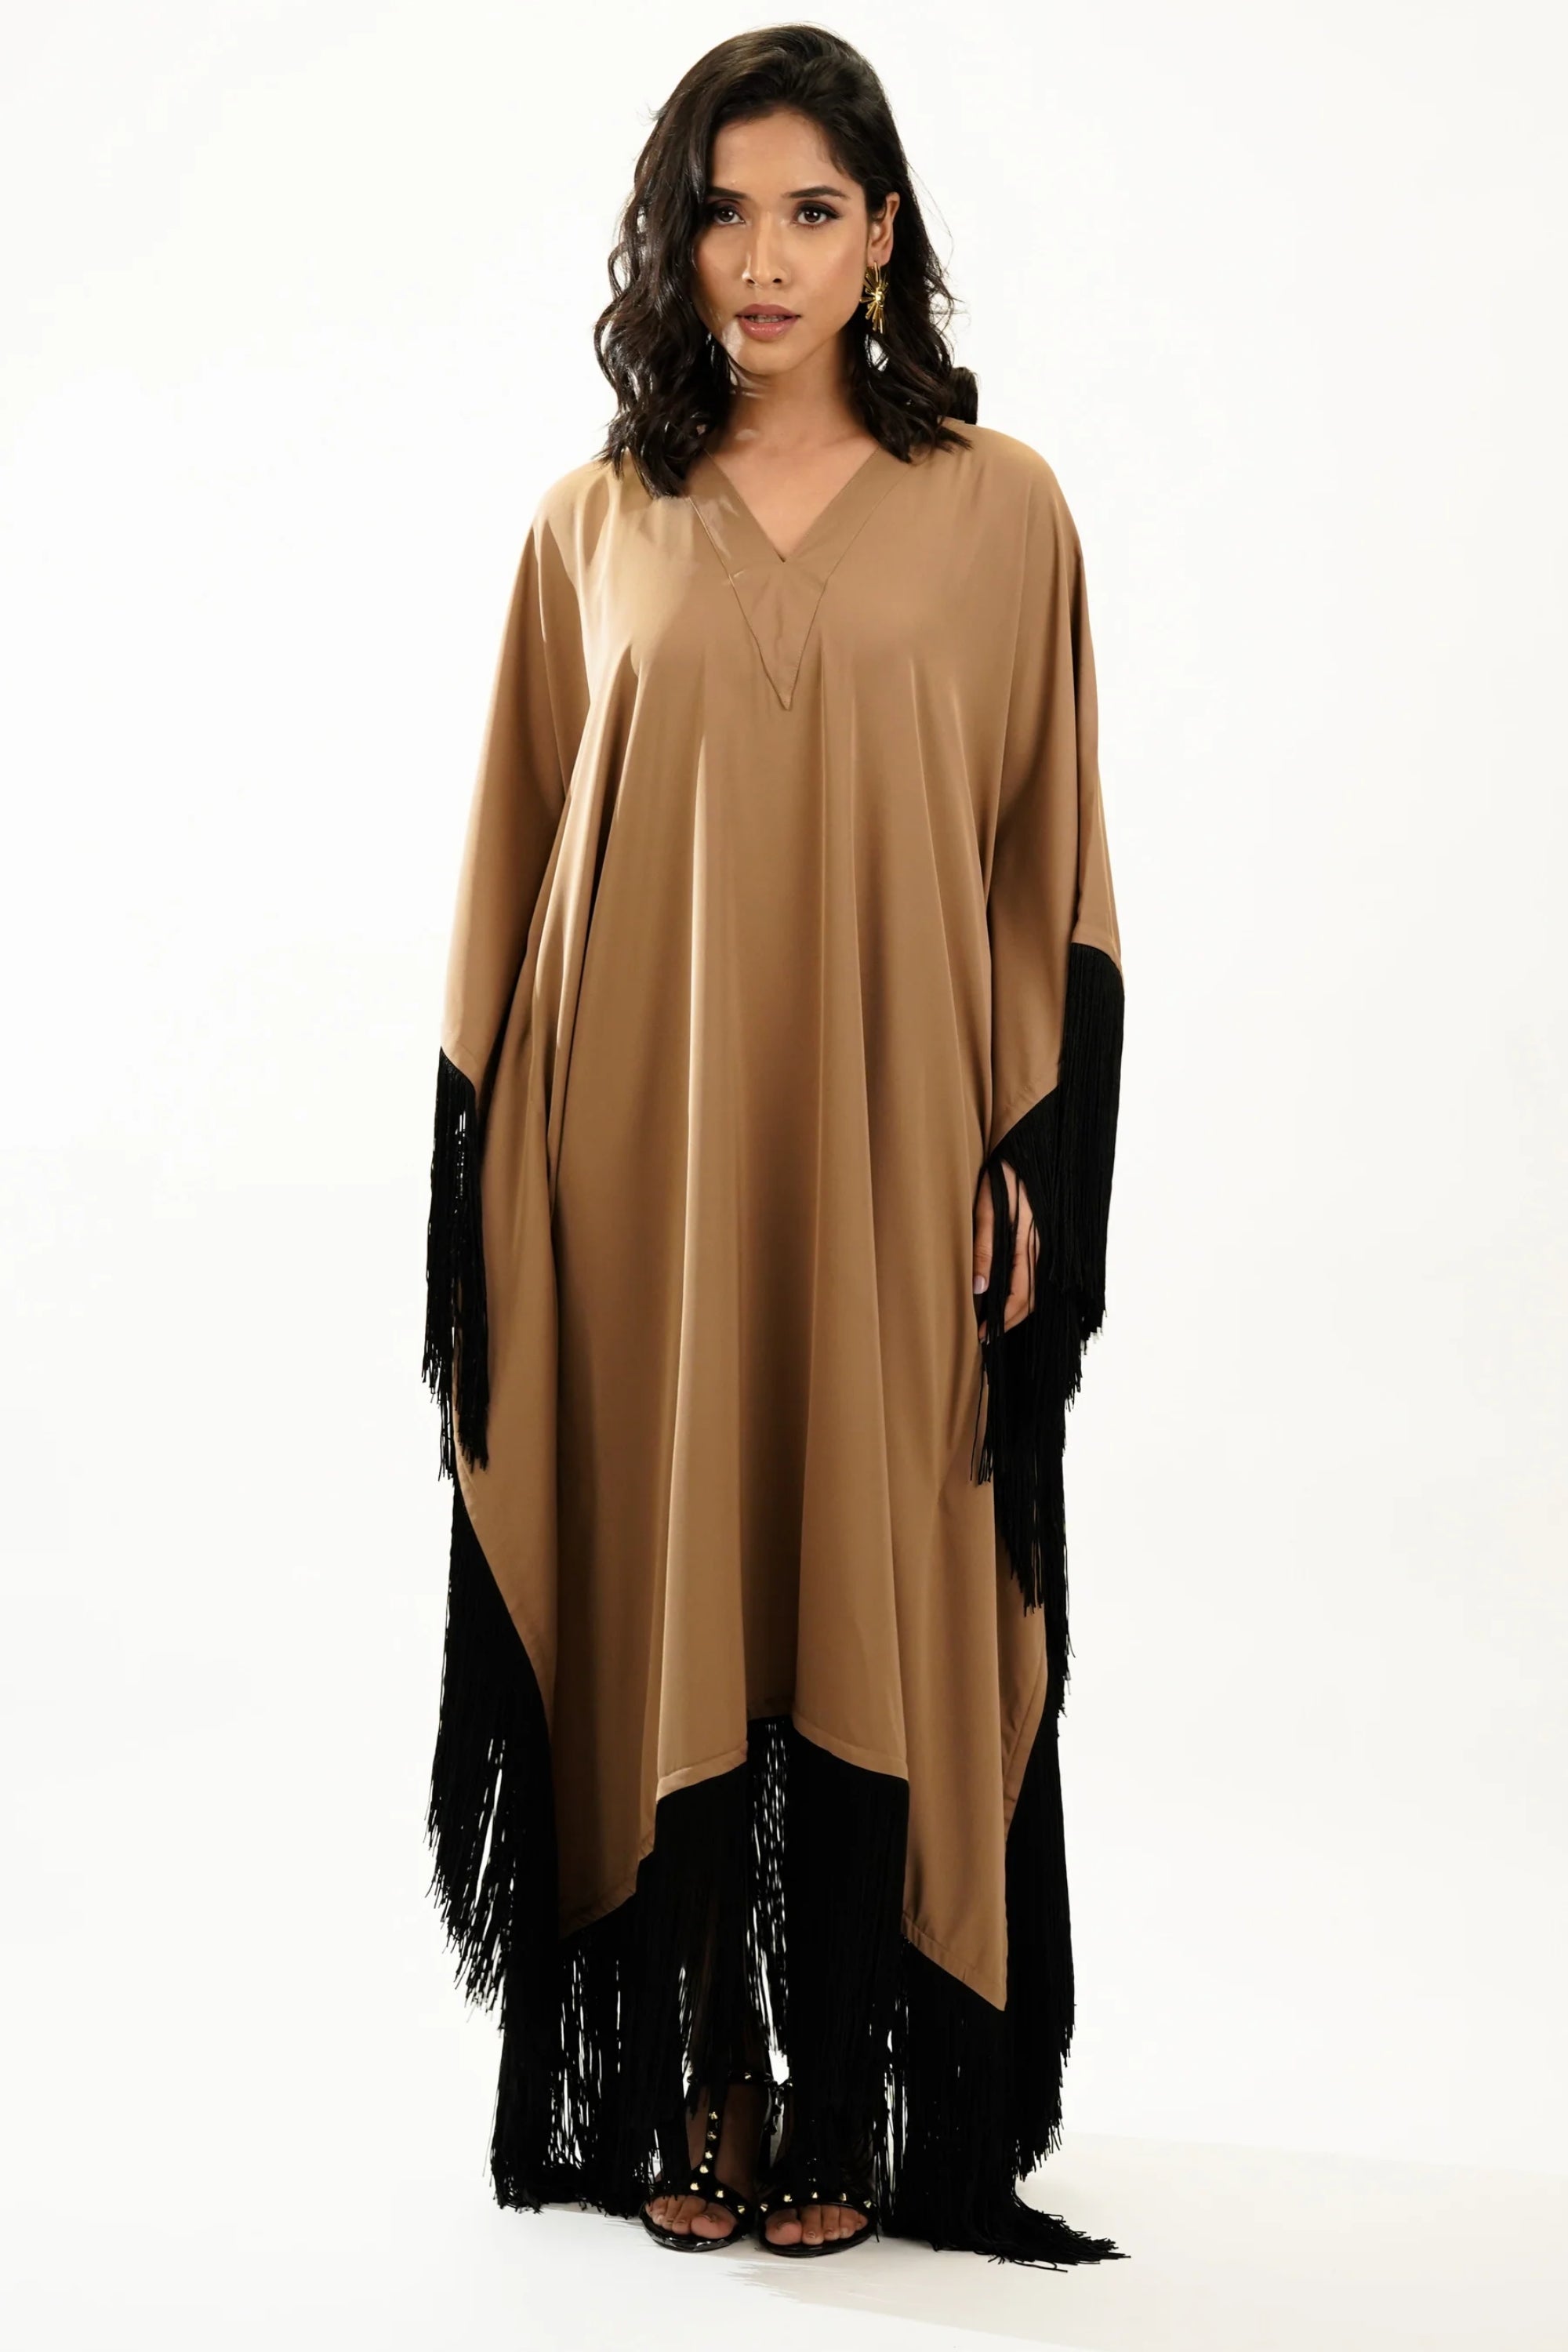 Frock style One-Piece Dress with Fancy sleeves and Jacket | Shop Now